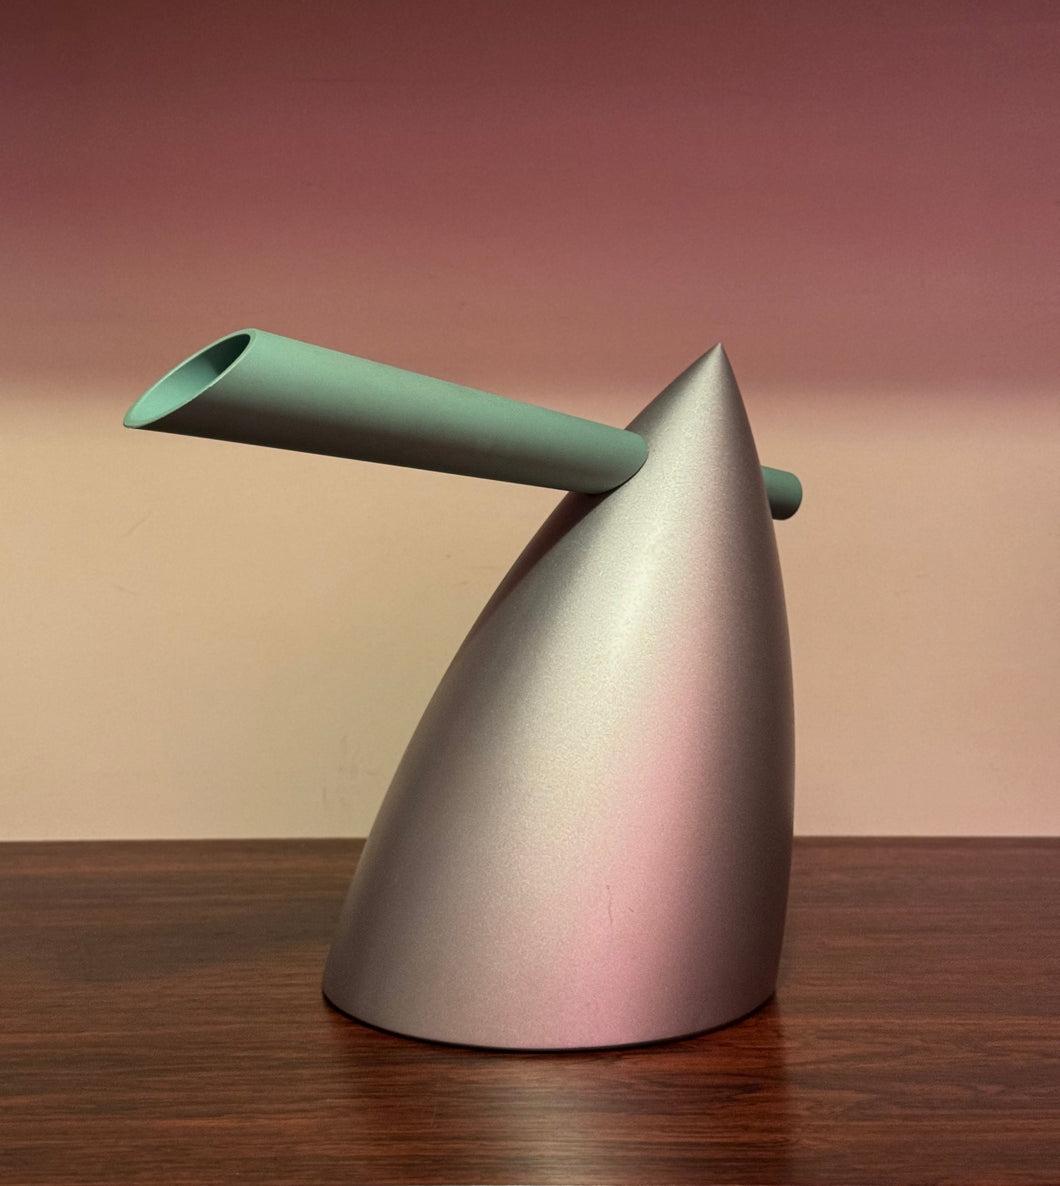 Hot Bertaa kettle by Philippe Starck for Alessi